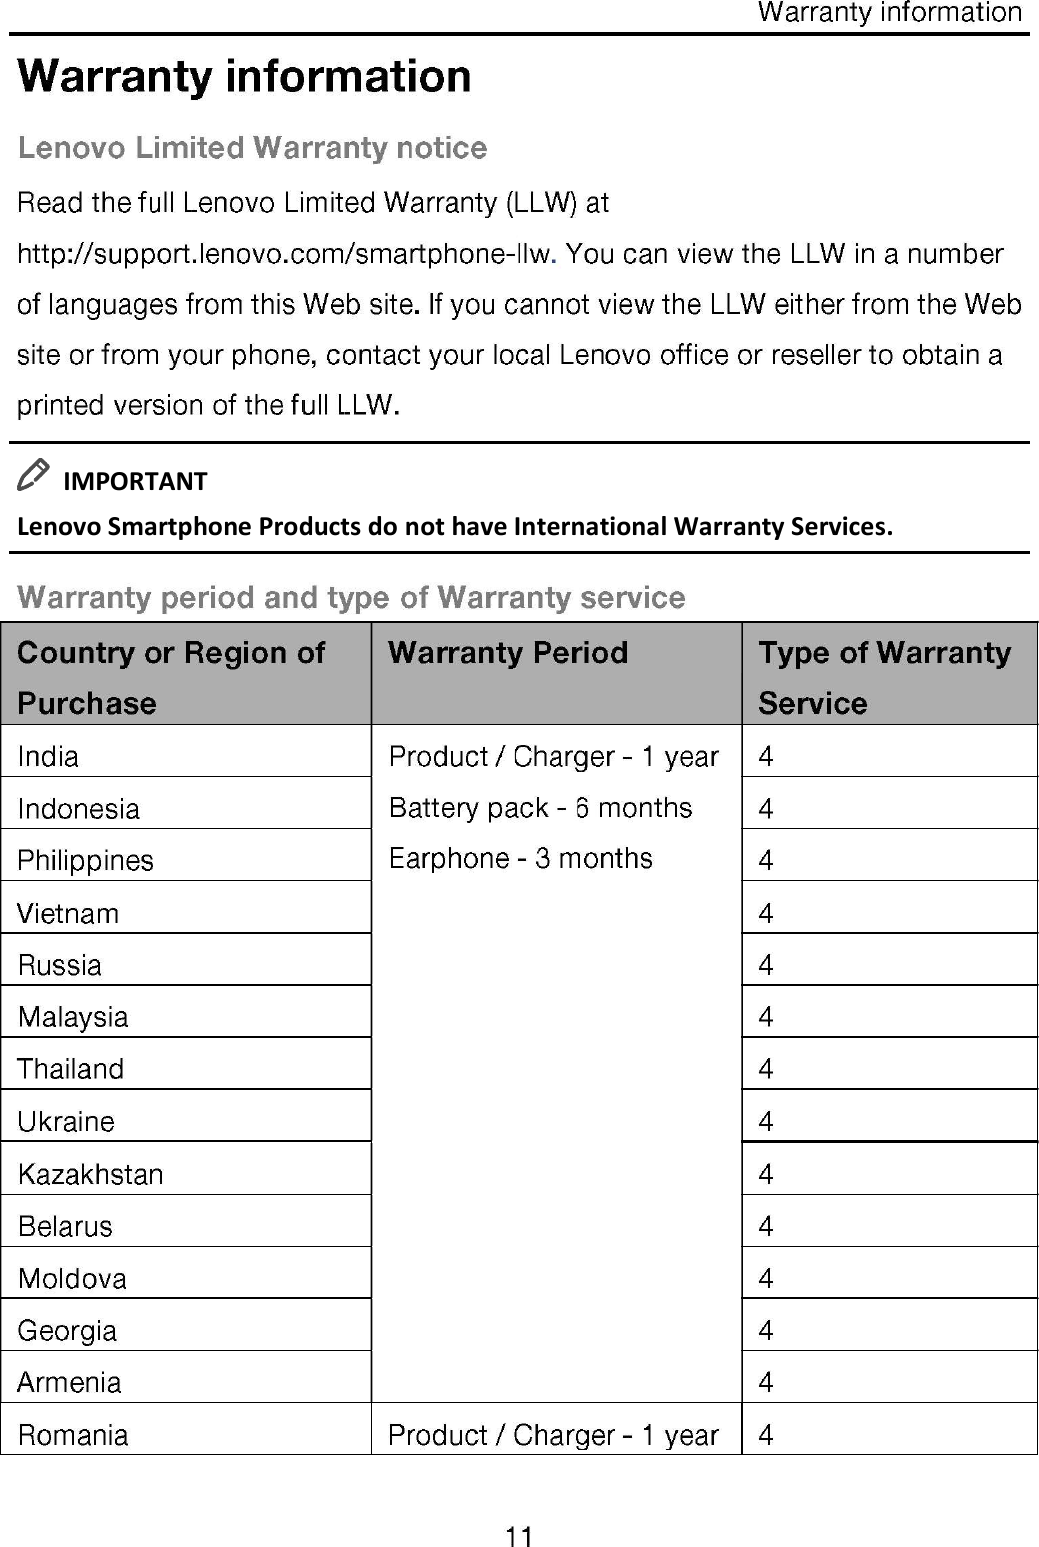   IMPORTANT Lenovo Smartphone Products do not have International Warranty Services. 